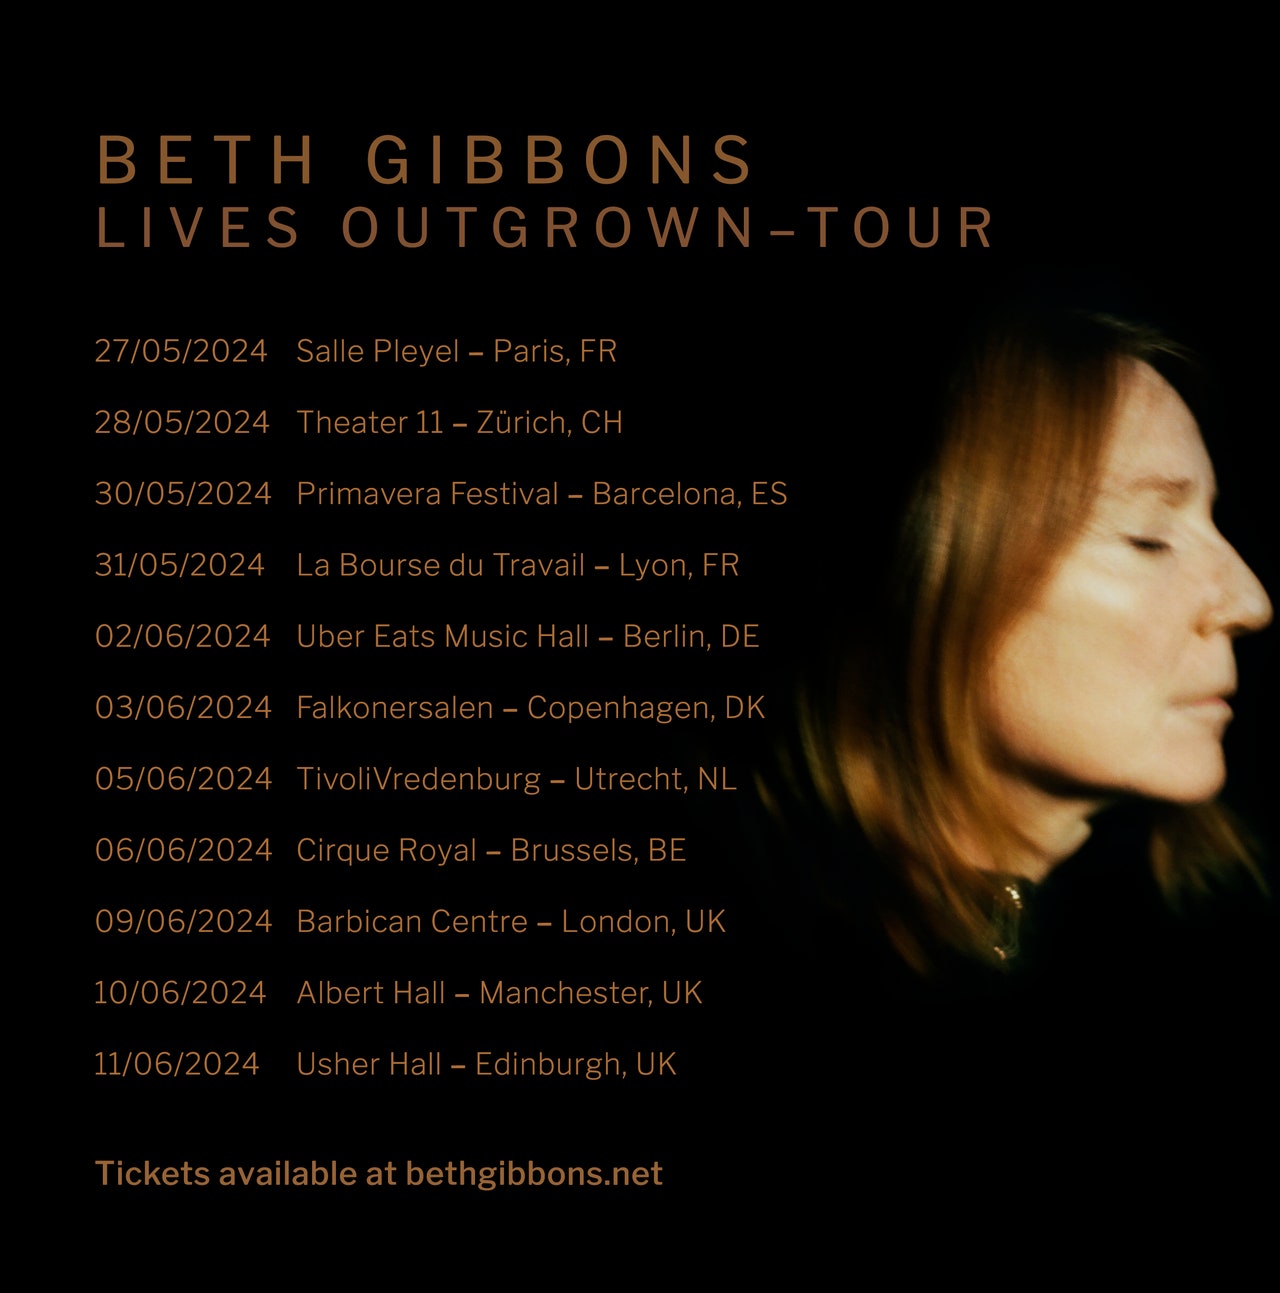 Beth Gibbons: Lives Outgrown Tour